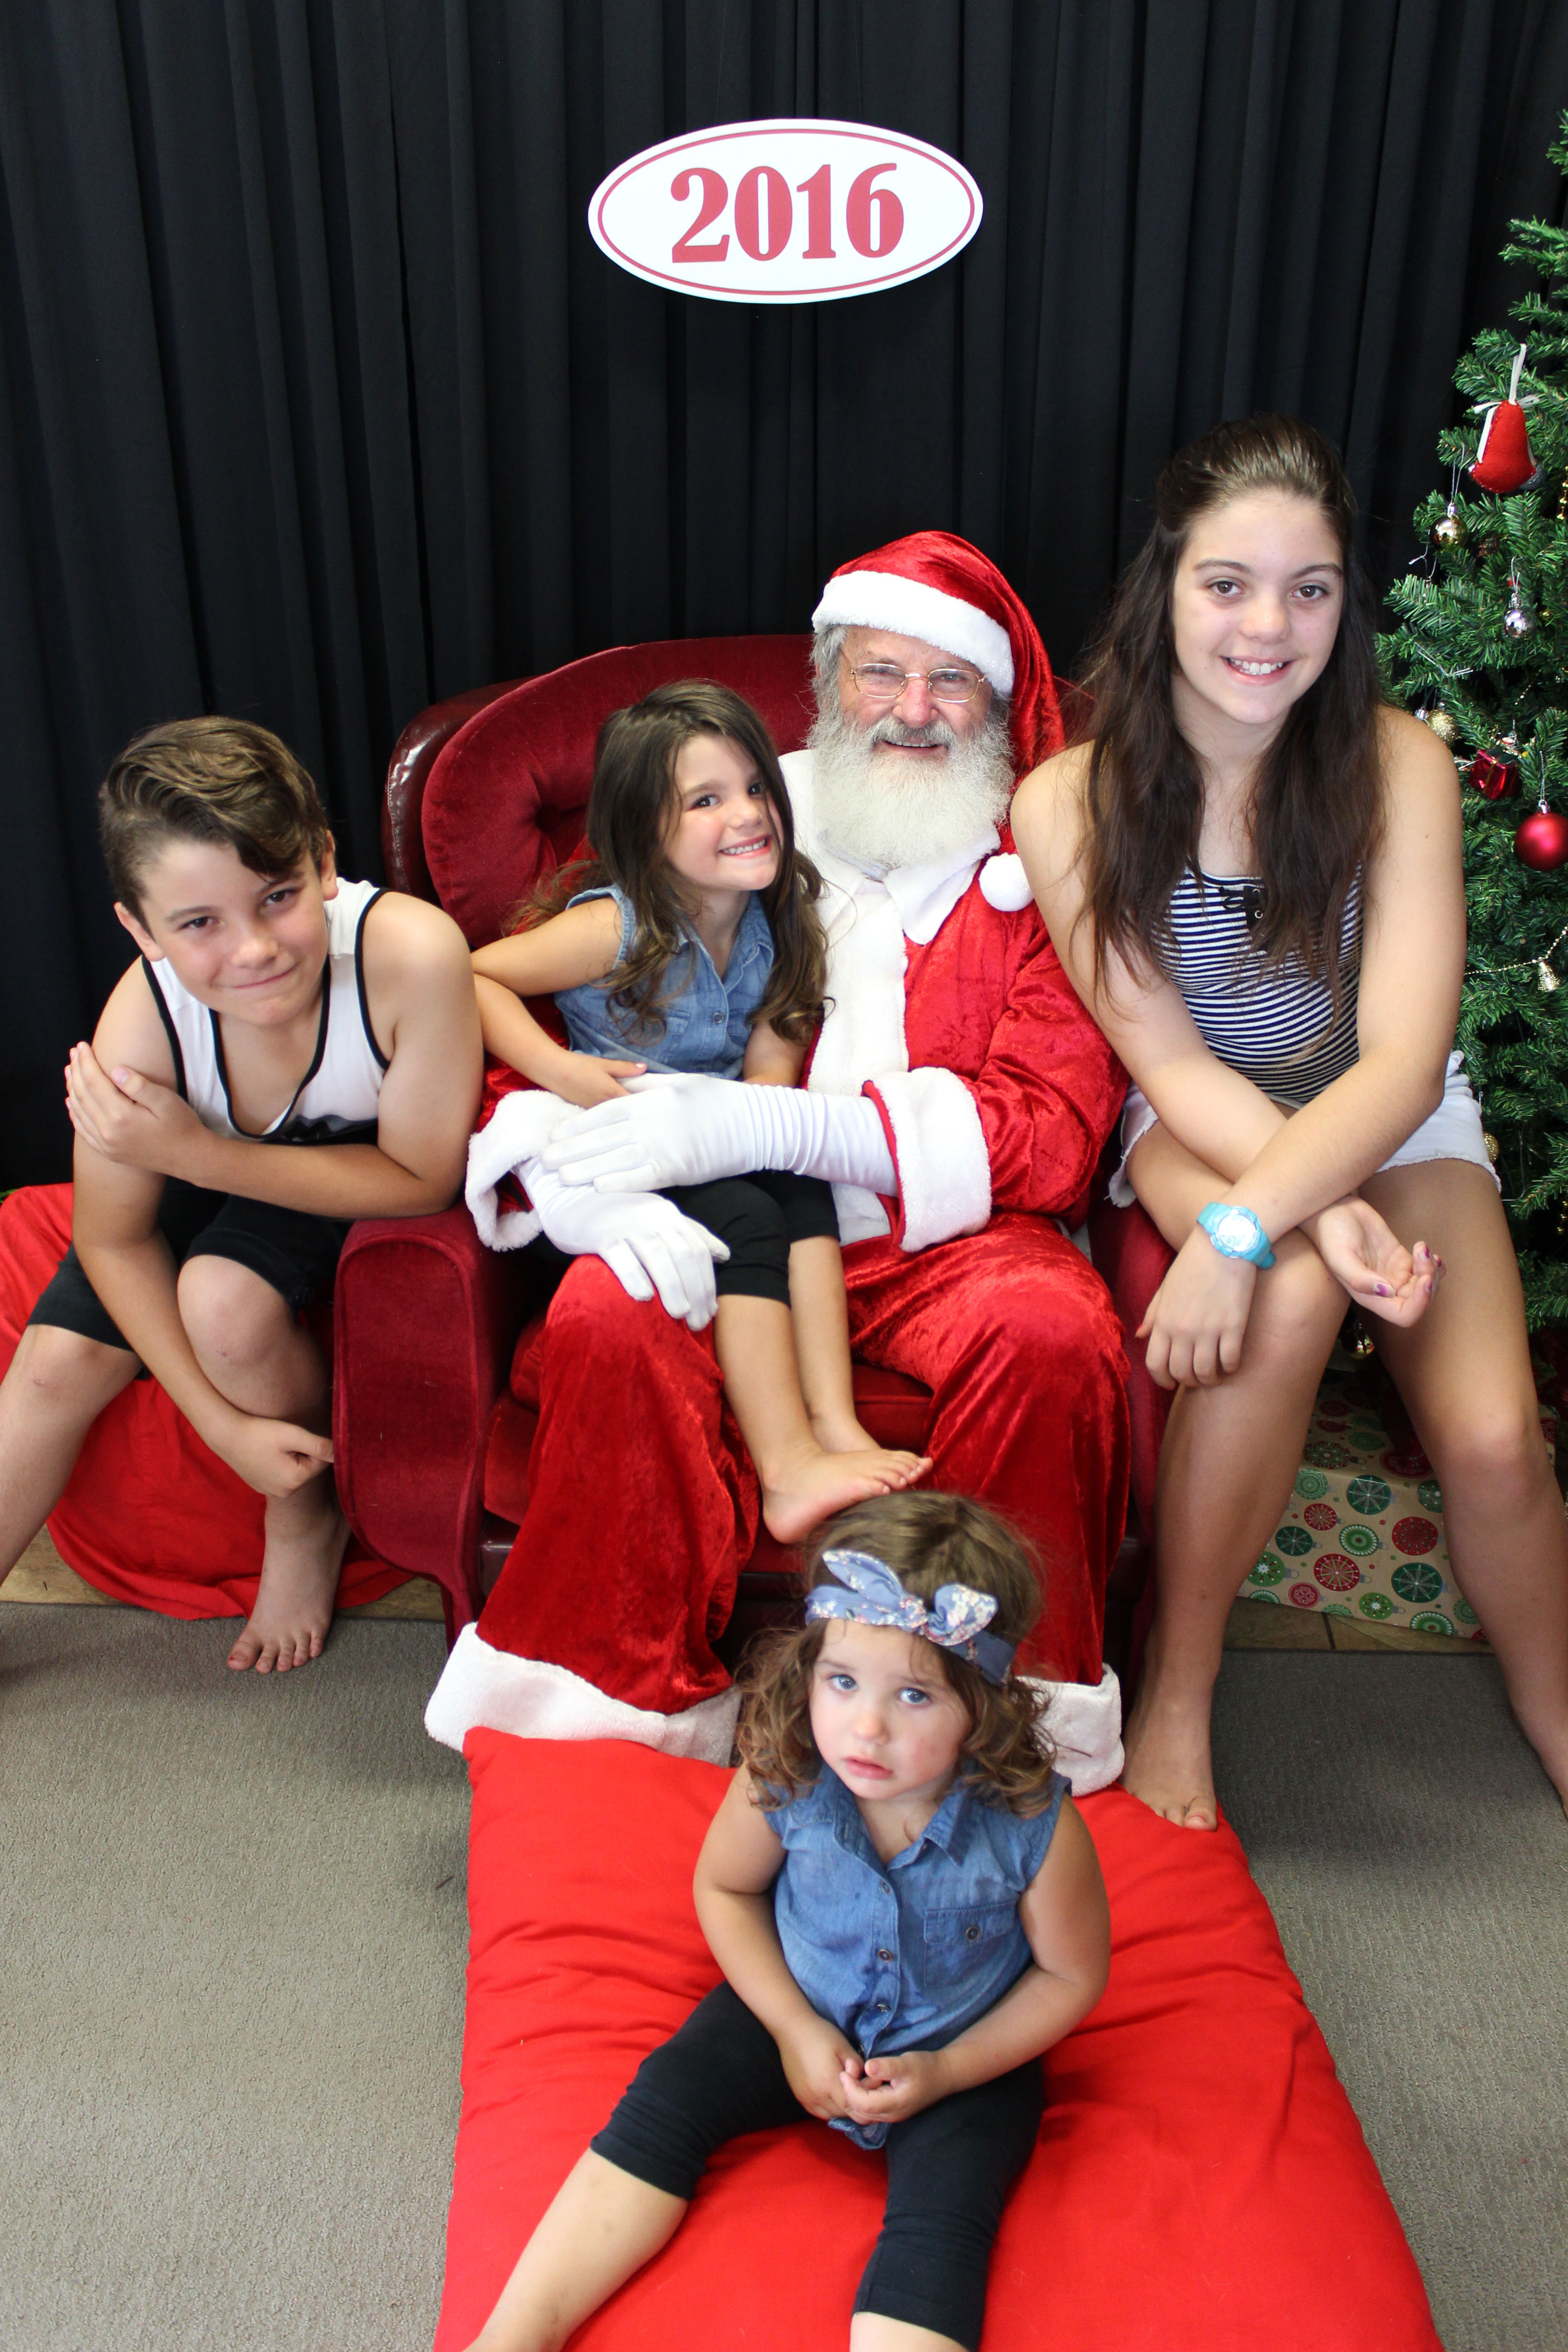 The Norris Family strike a pose with Santa. Photo supplied by Aaron McGowan